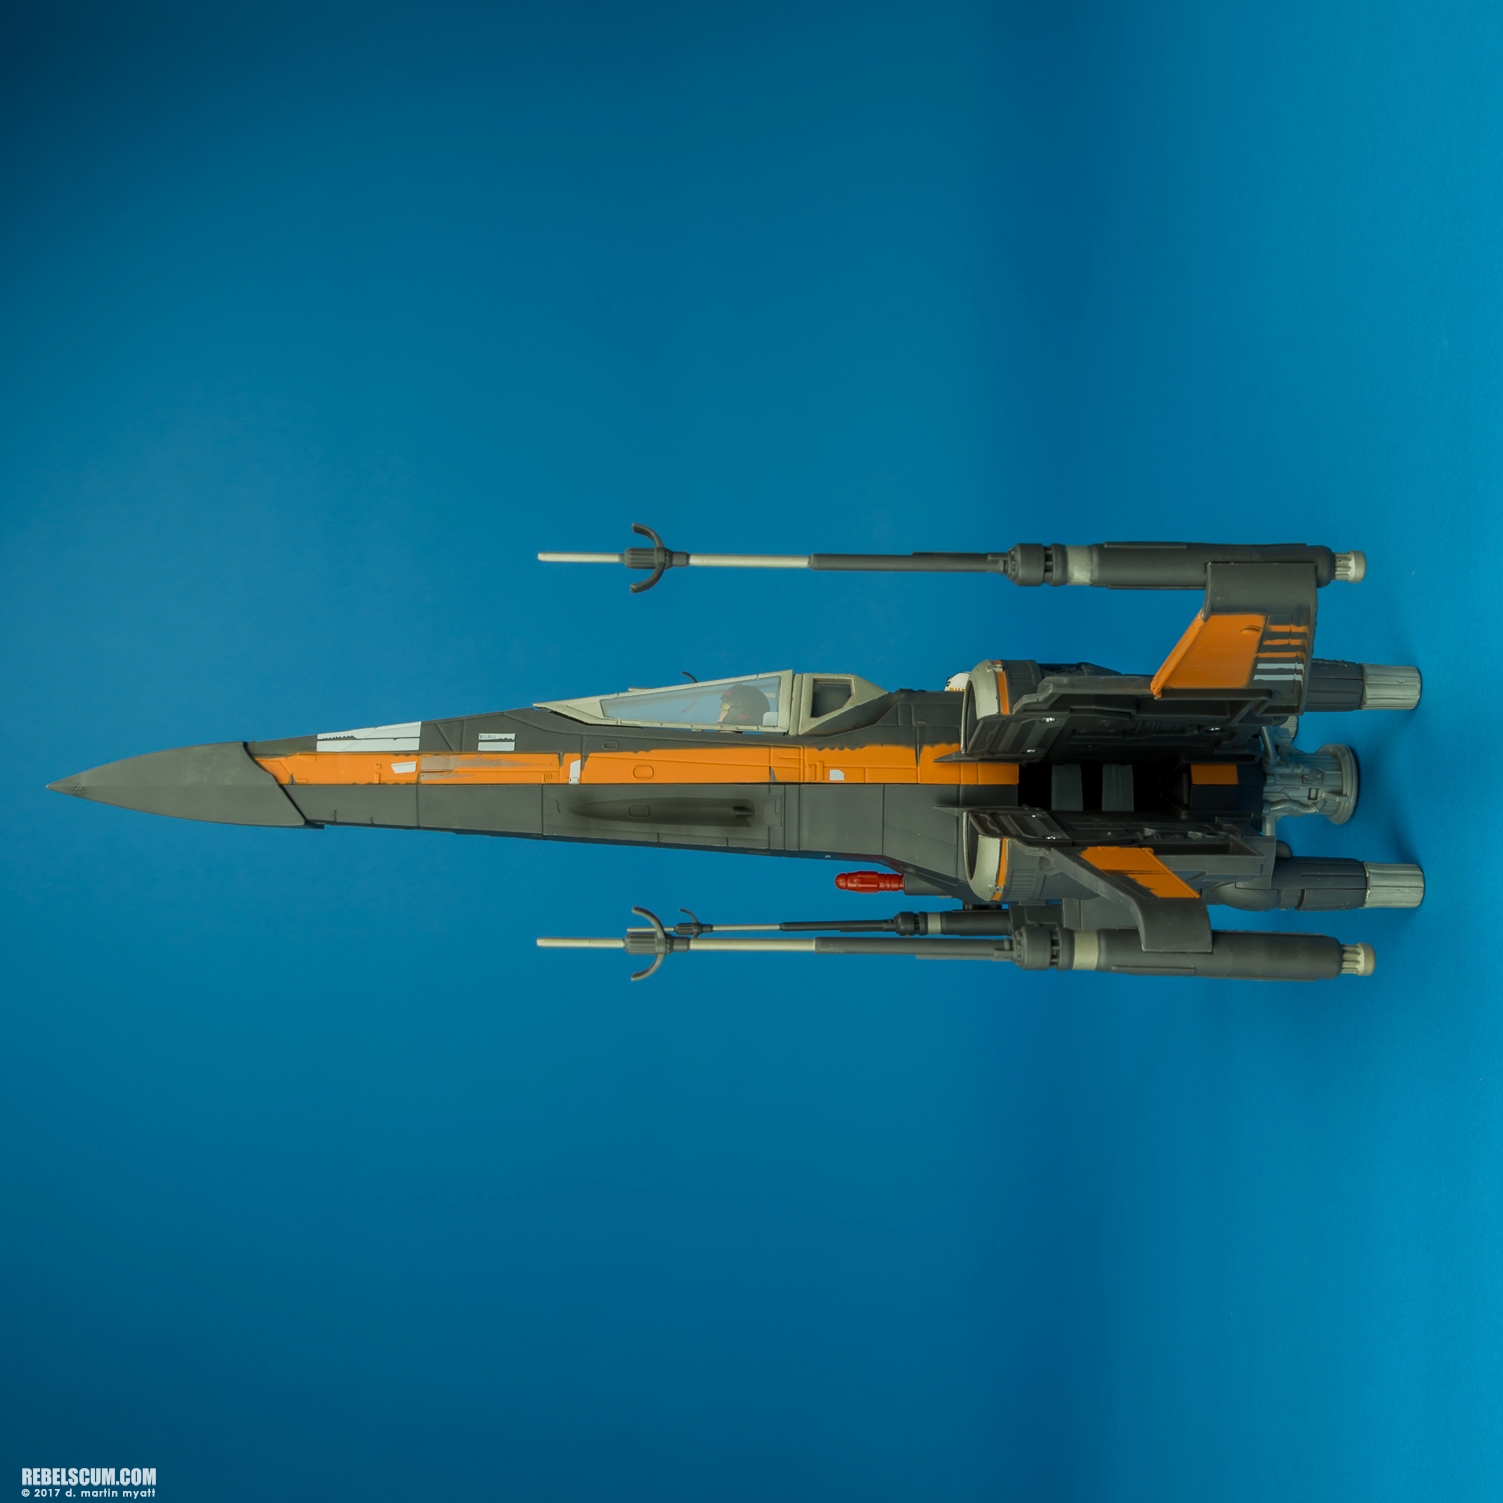 Poes-Boosted-X-Wing-Fighter-The-Last-Jedi-Hasbro-006.jpg